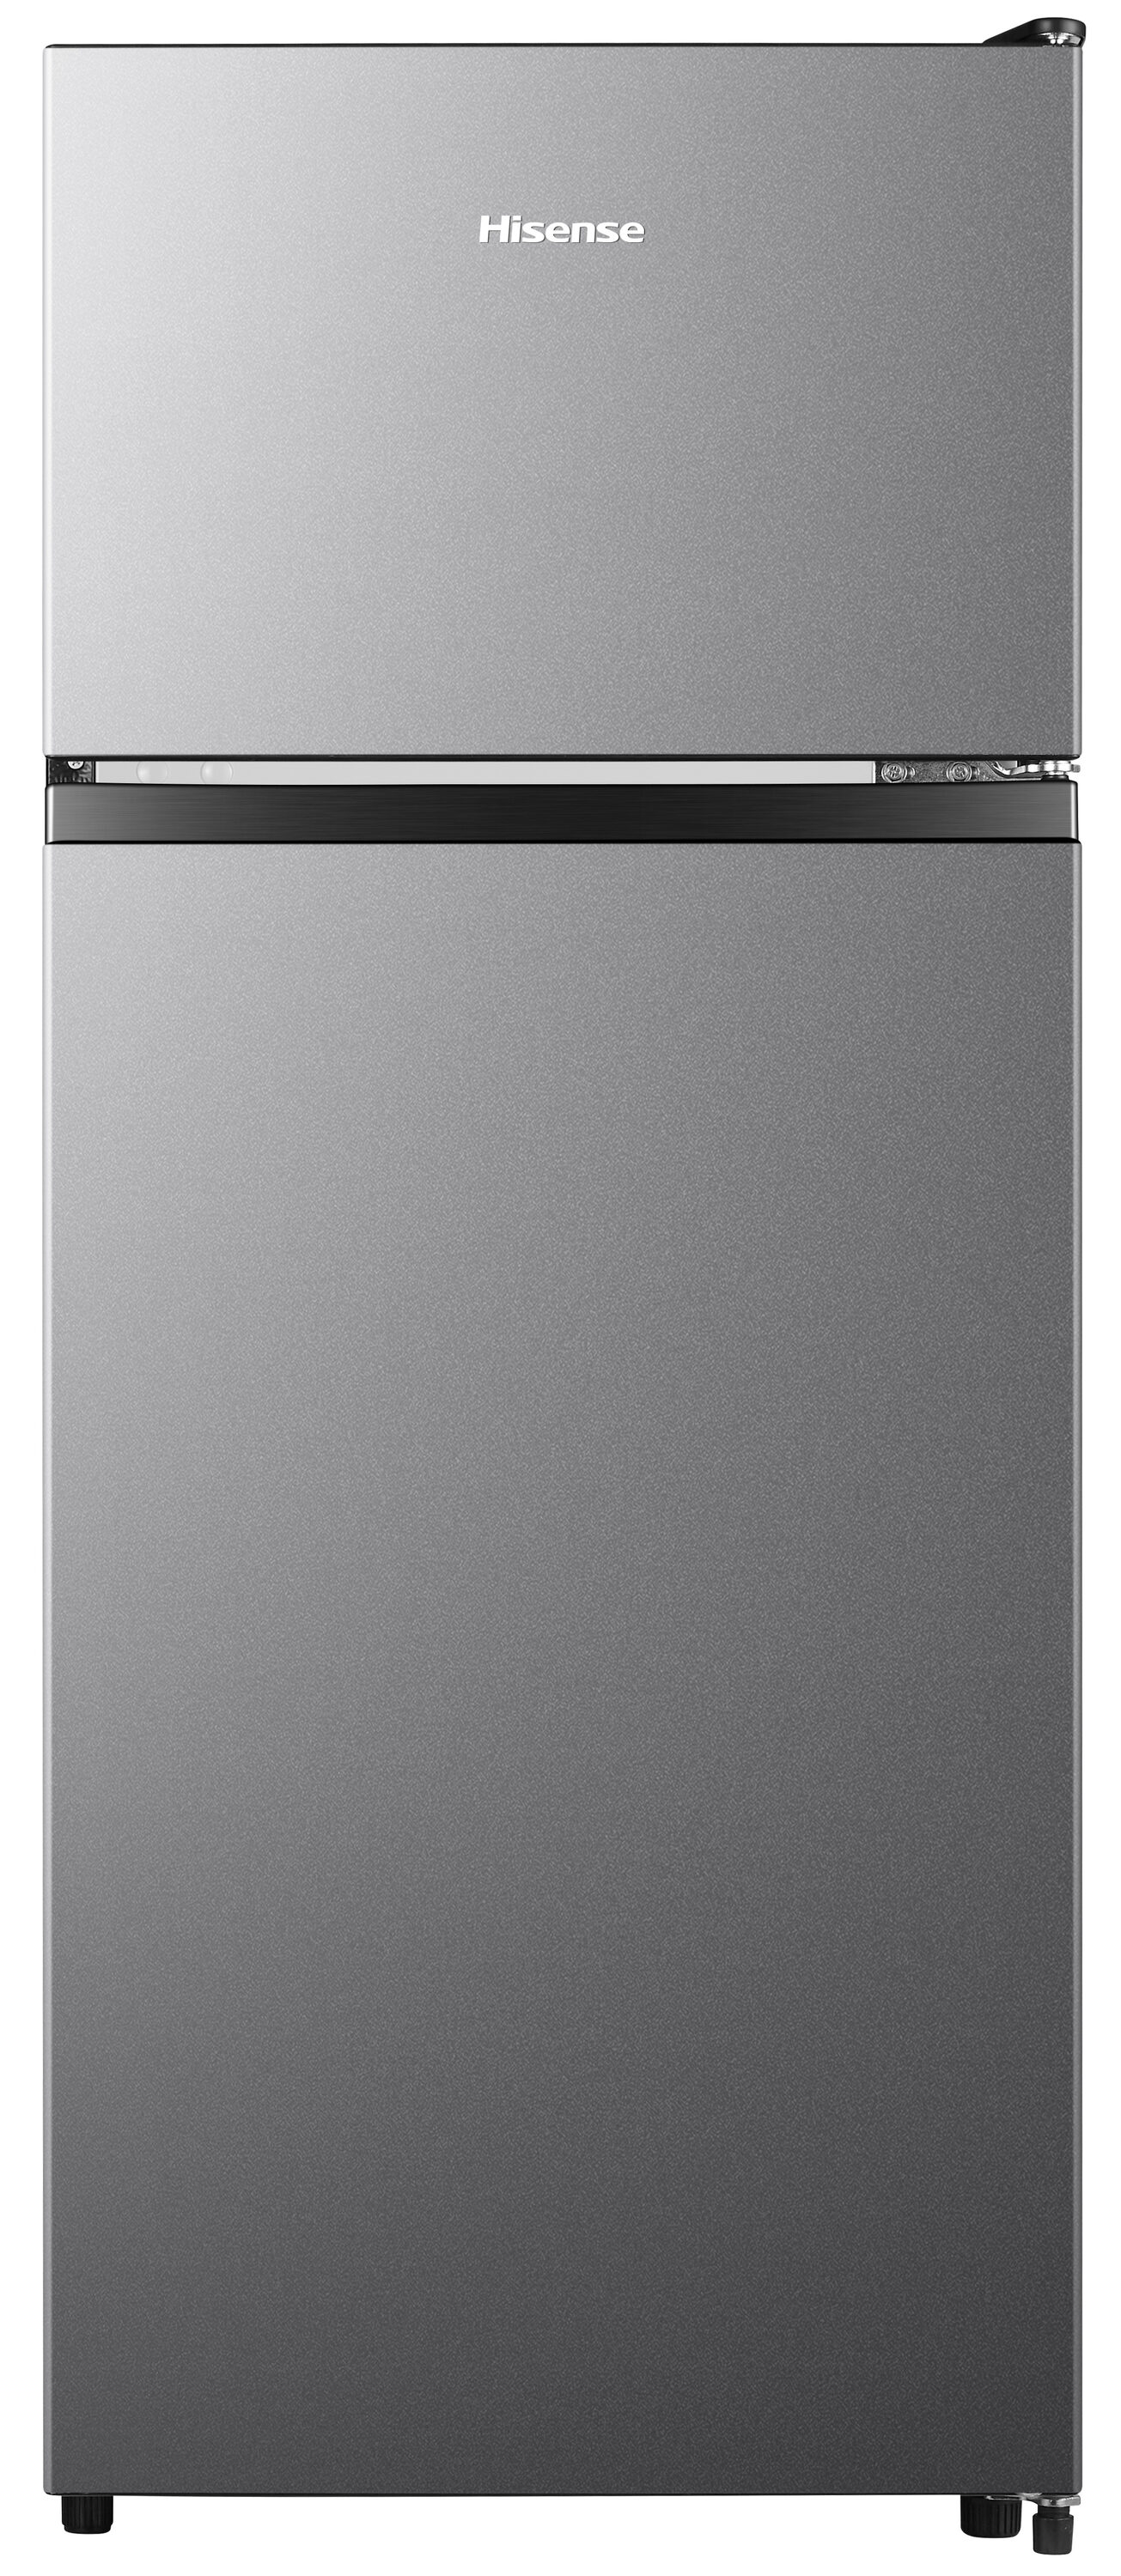 Deco Chef 15-inch Under Counter Mini Fridge, Stainless Steel Finish, Adjustable Thermostat